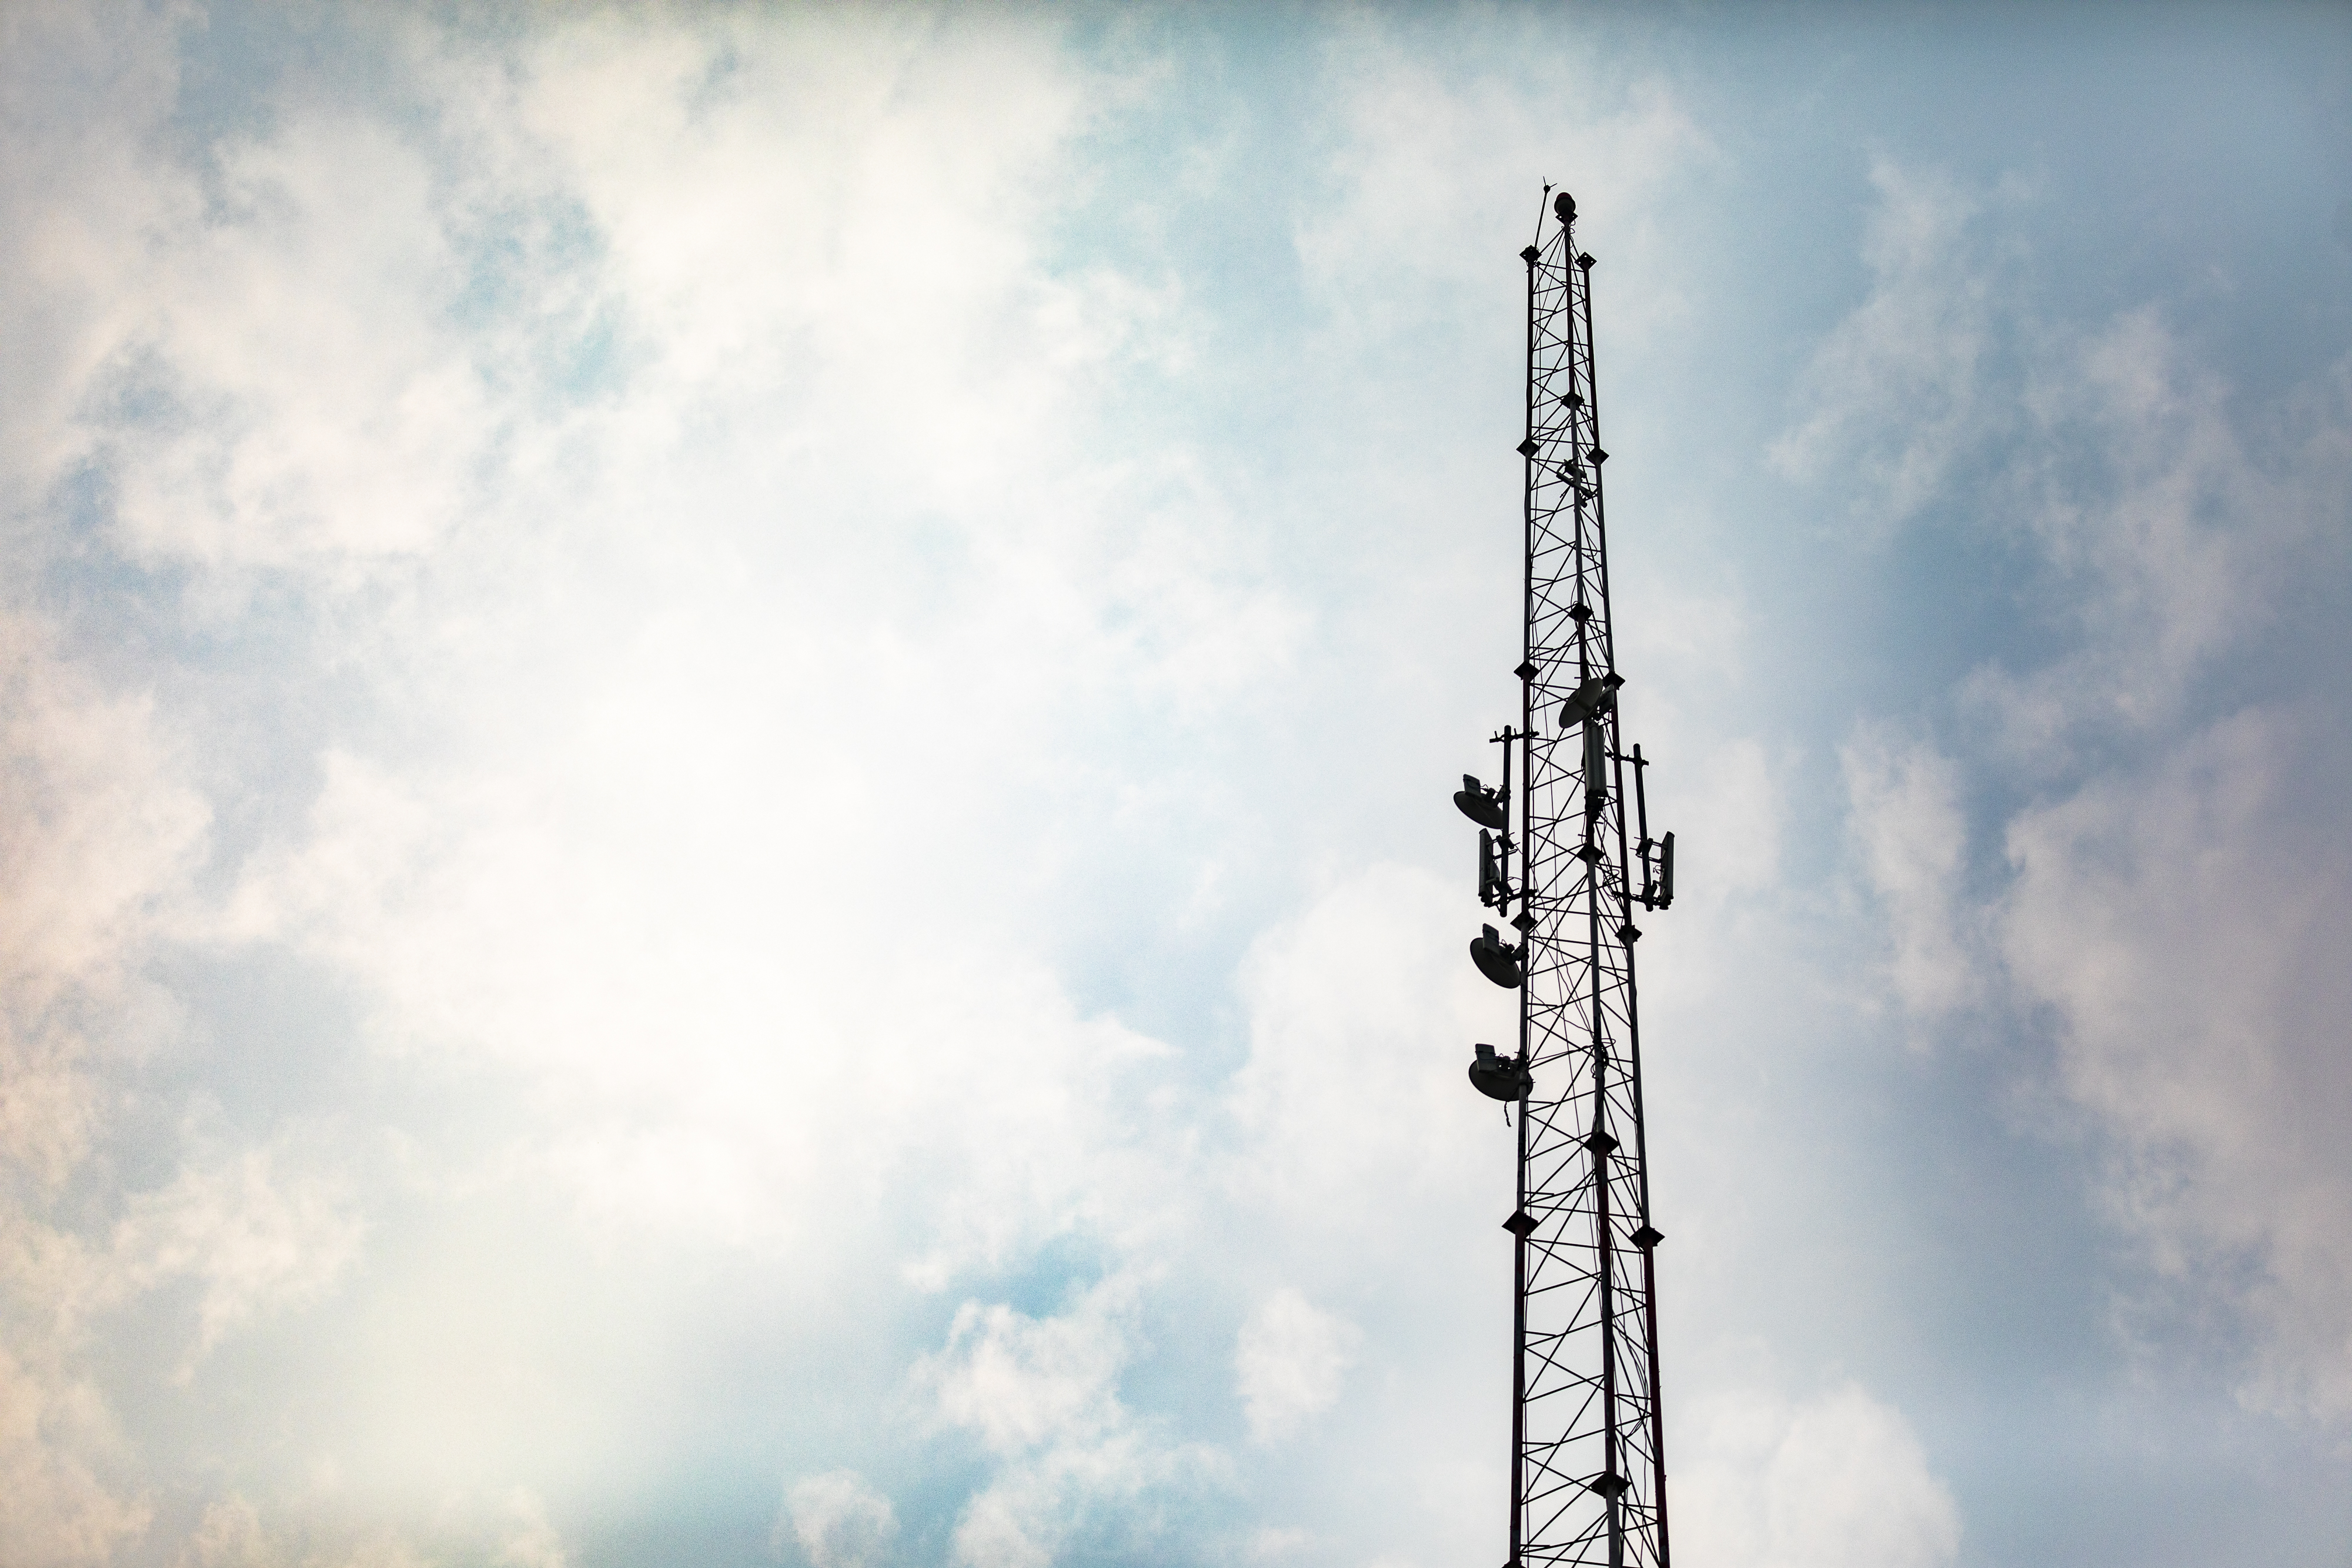 Ensuring last mile connectivity by installing towers in rural and remote areas